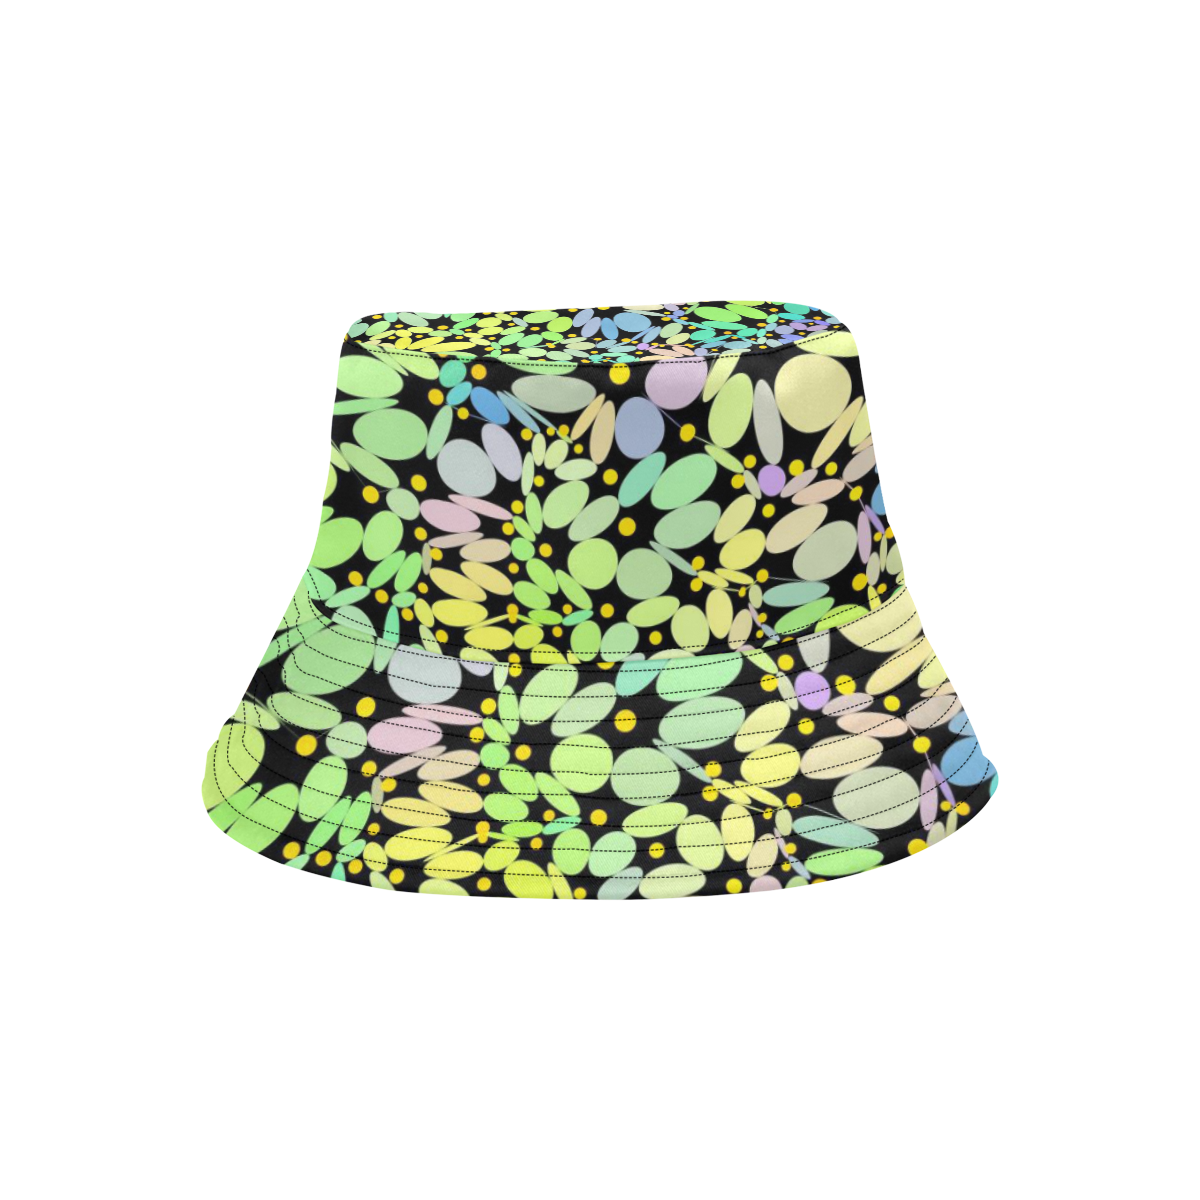 Power Flowers 318A by JamColors All Over Print Bucket Hat